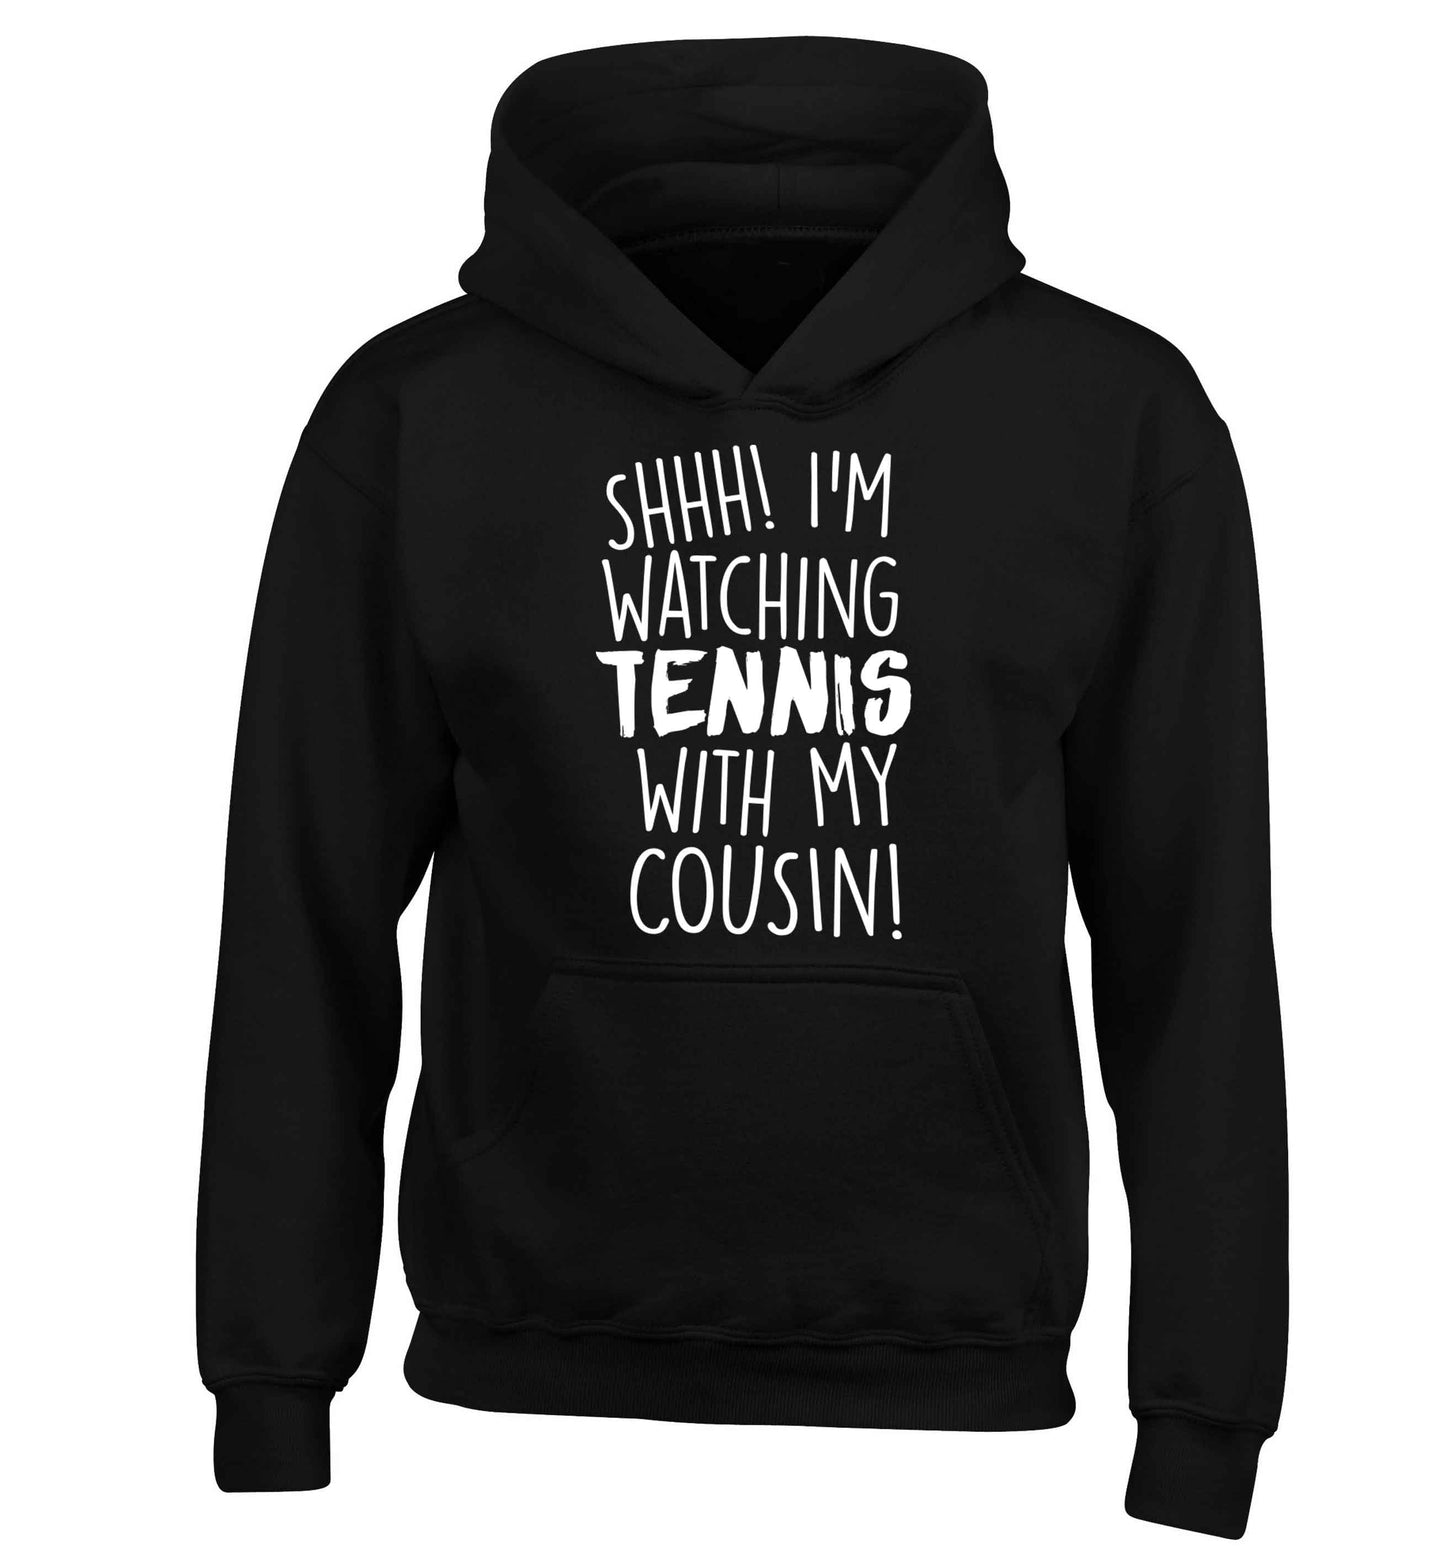 Shh! I'm watching tennis with my cousin! children's black hoodie 12-13 Years